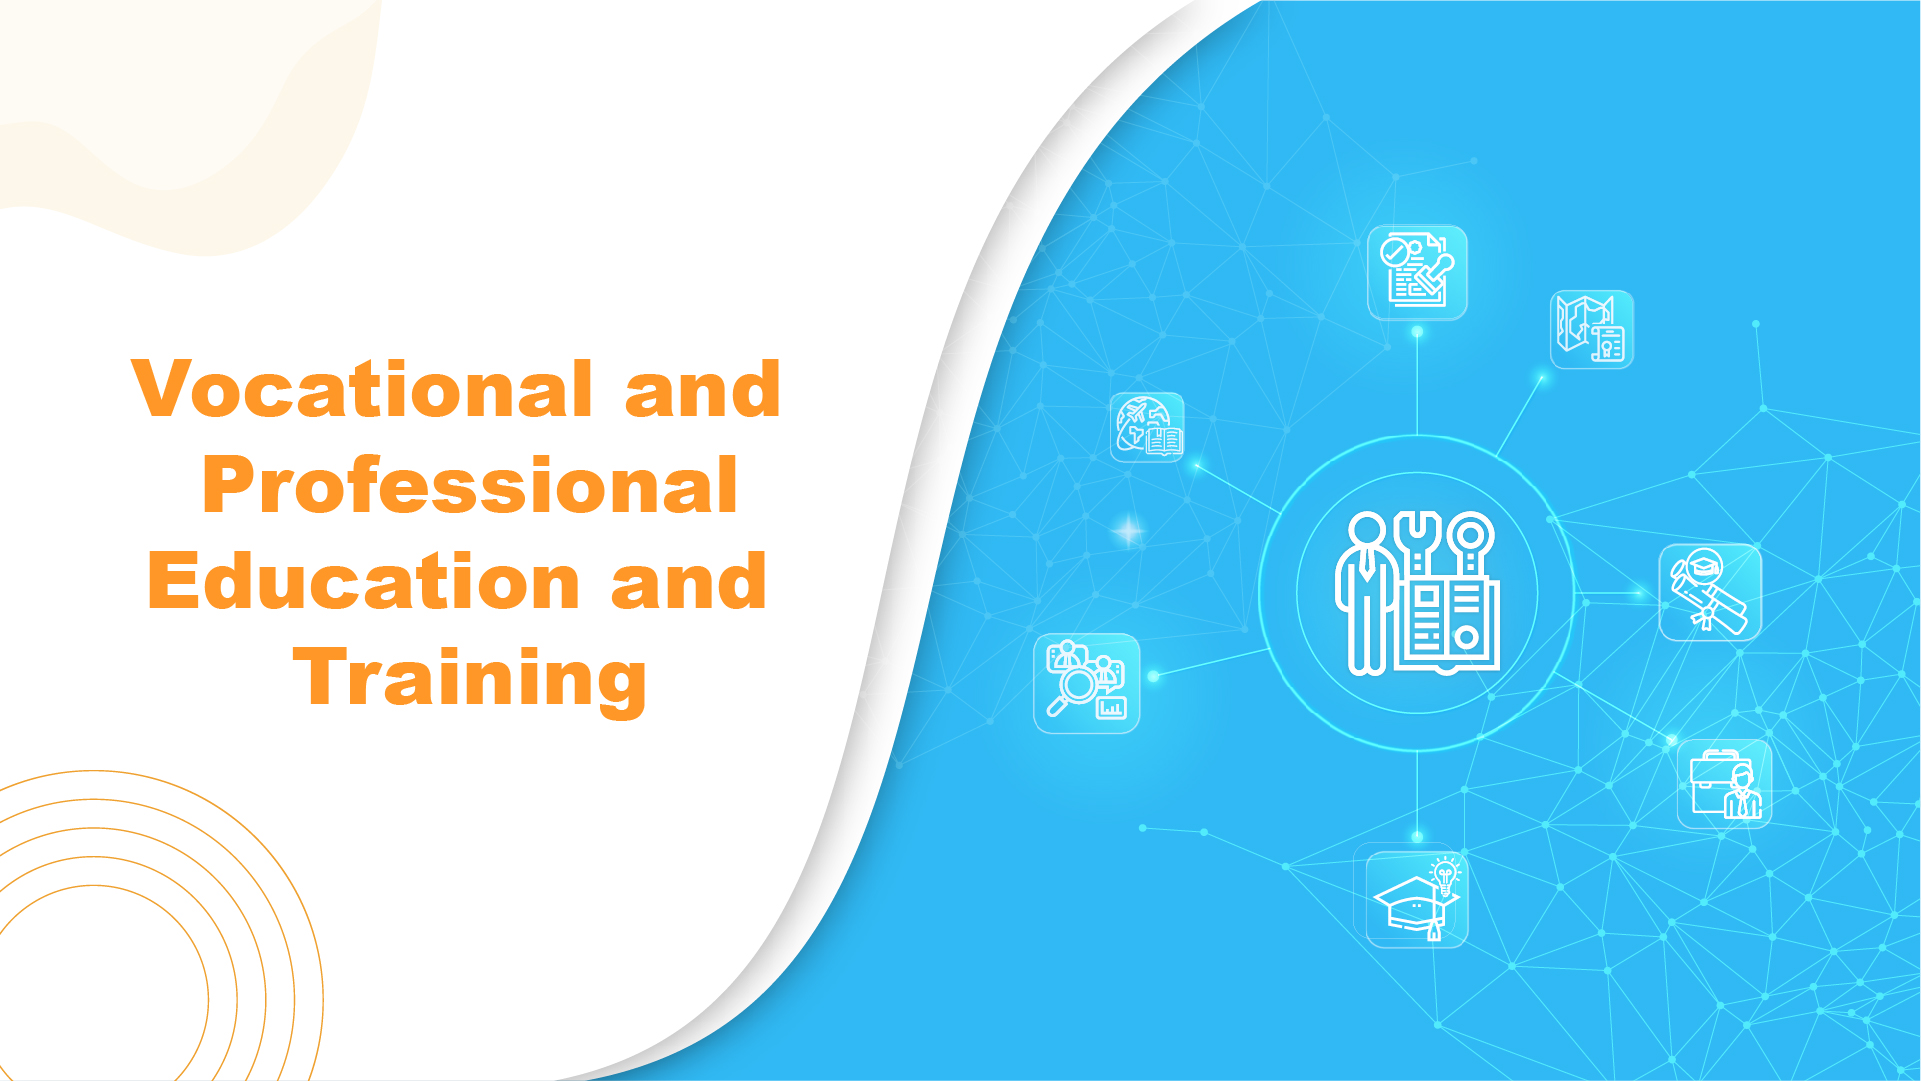 Vocational and Professional Education and Training